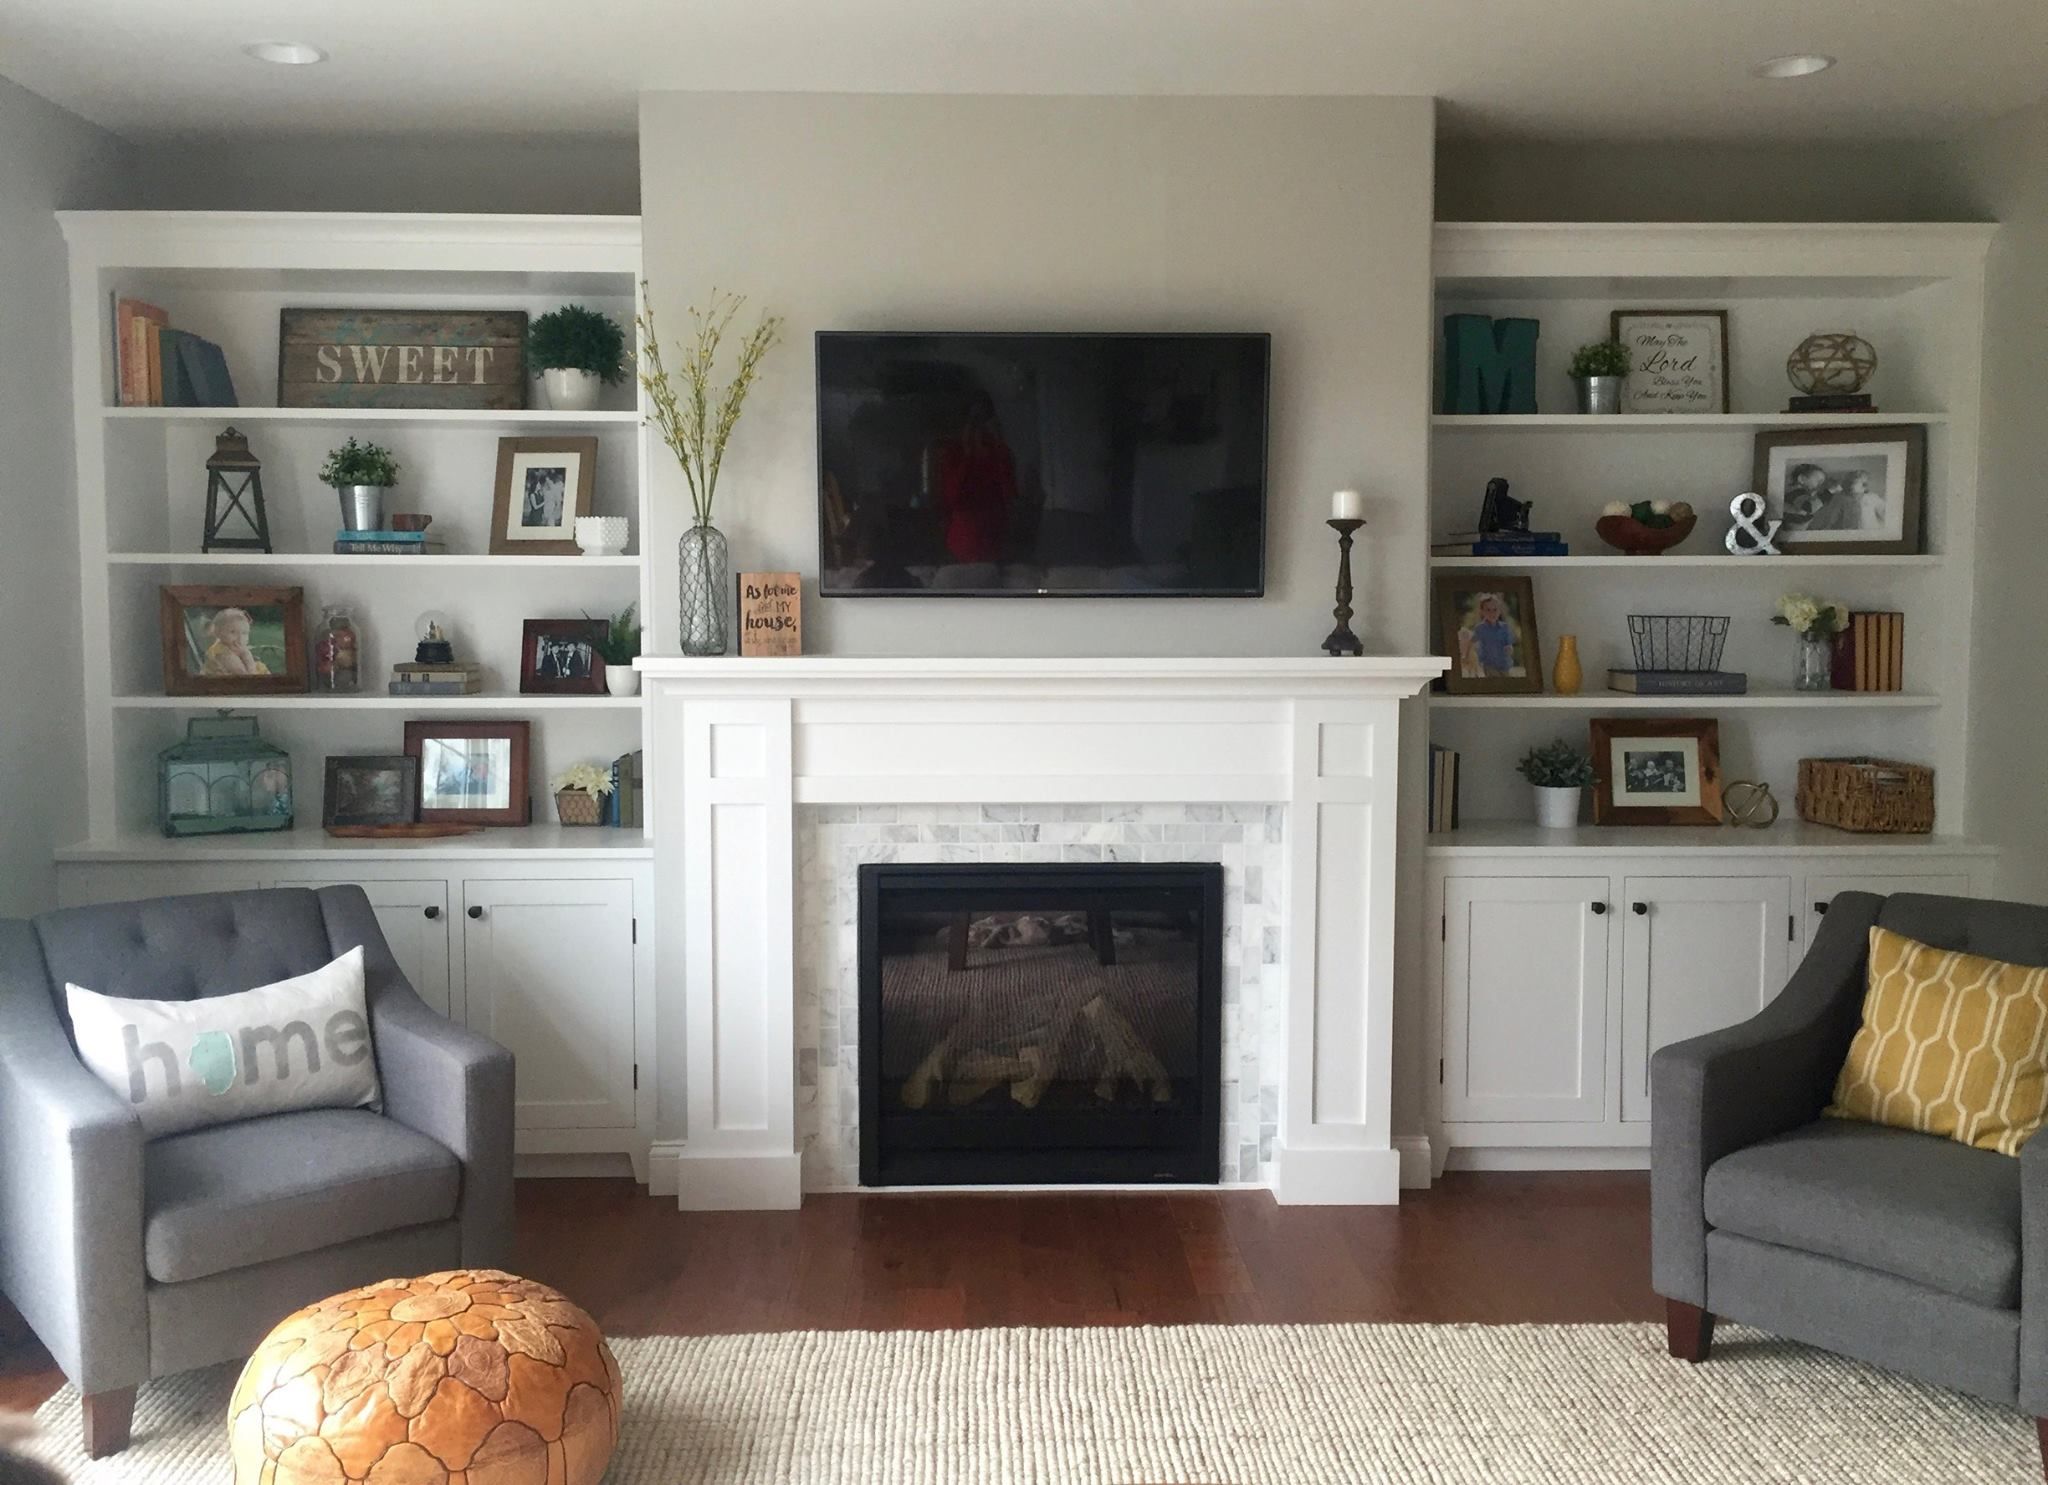 Floating Shelves by Fireplace Elegant Instructions to Build This Fireplace Mantel with Built In